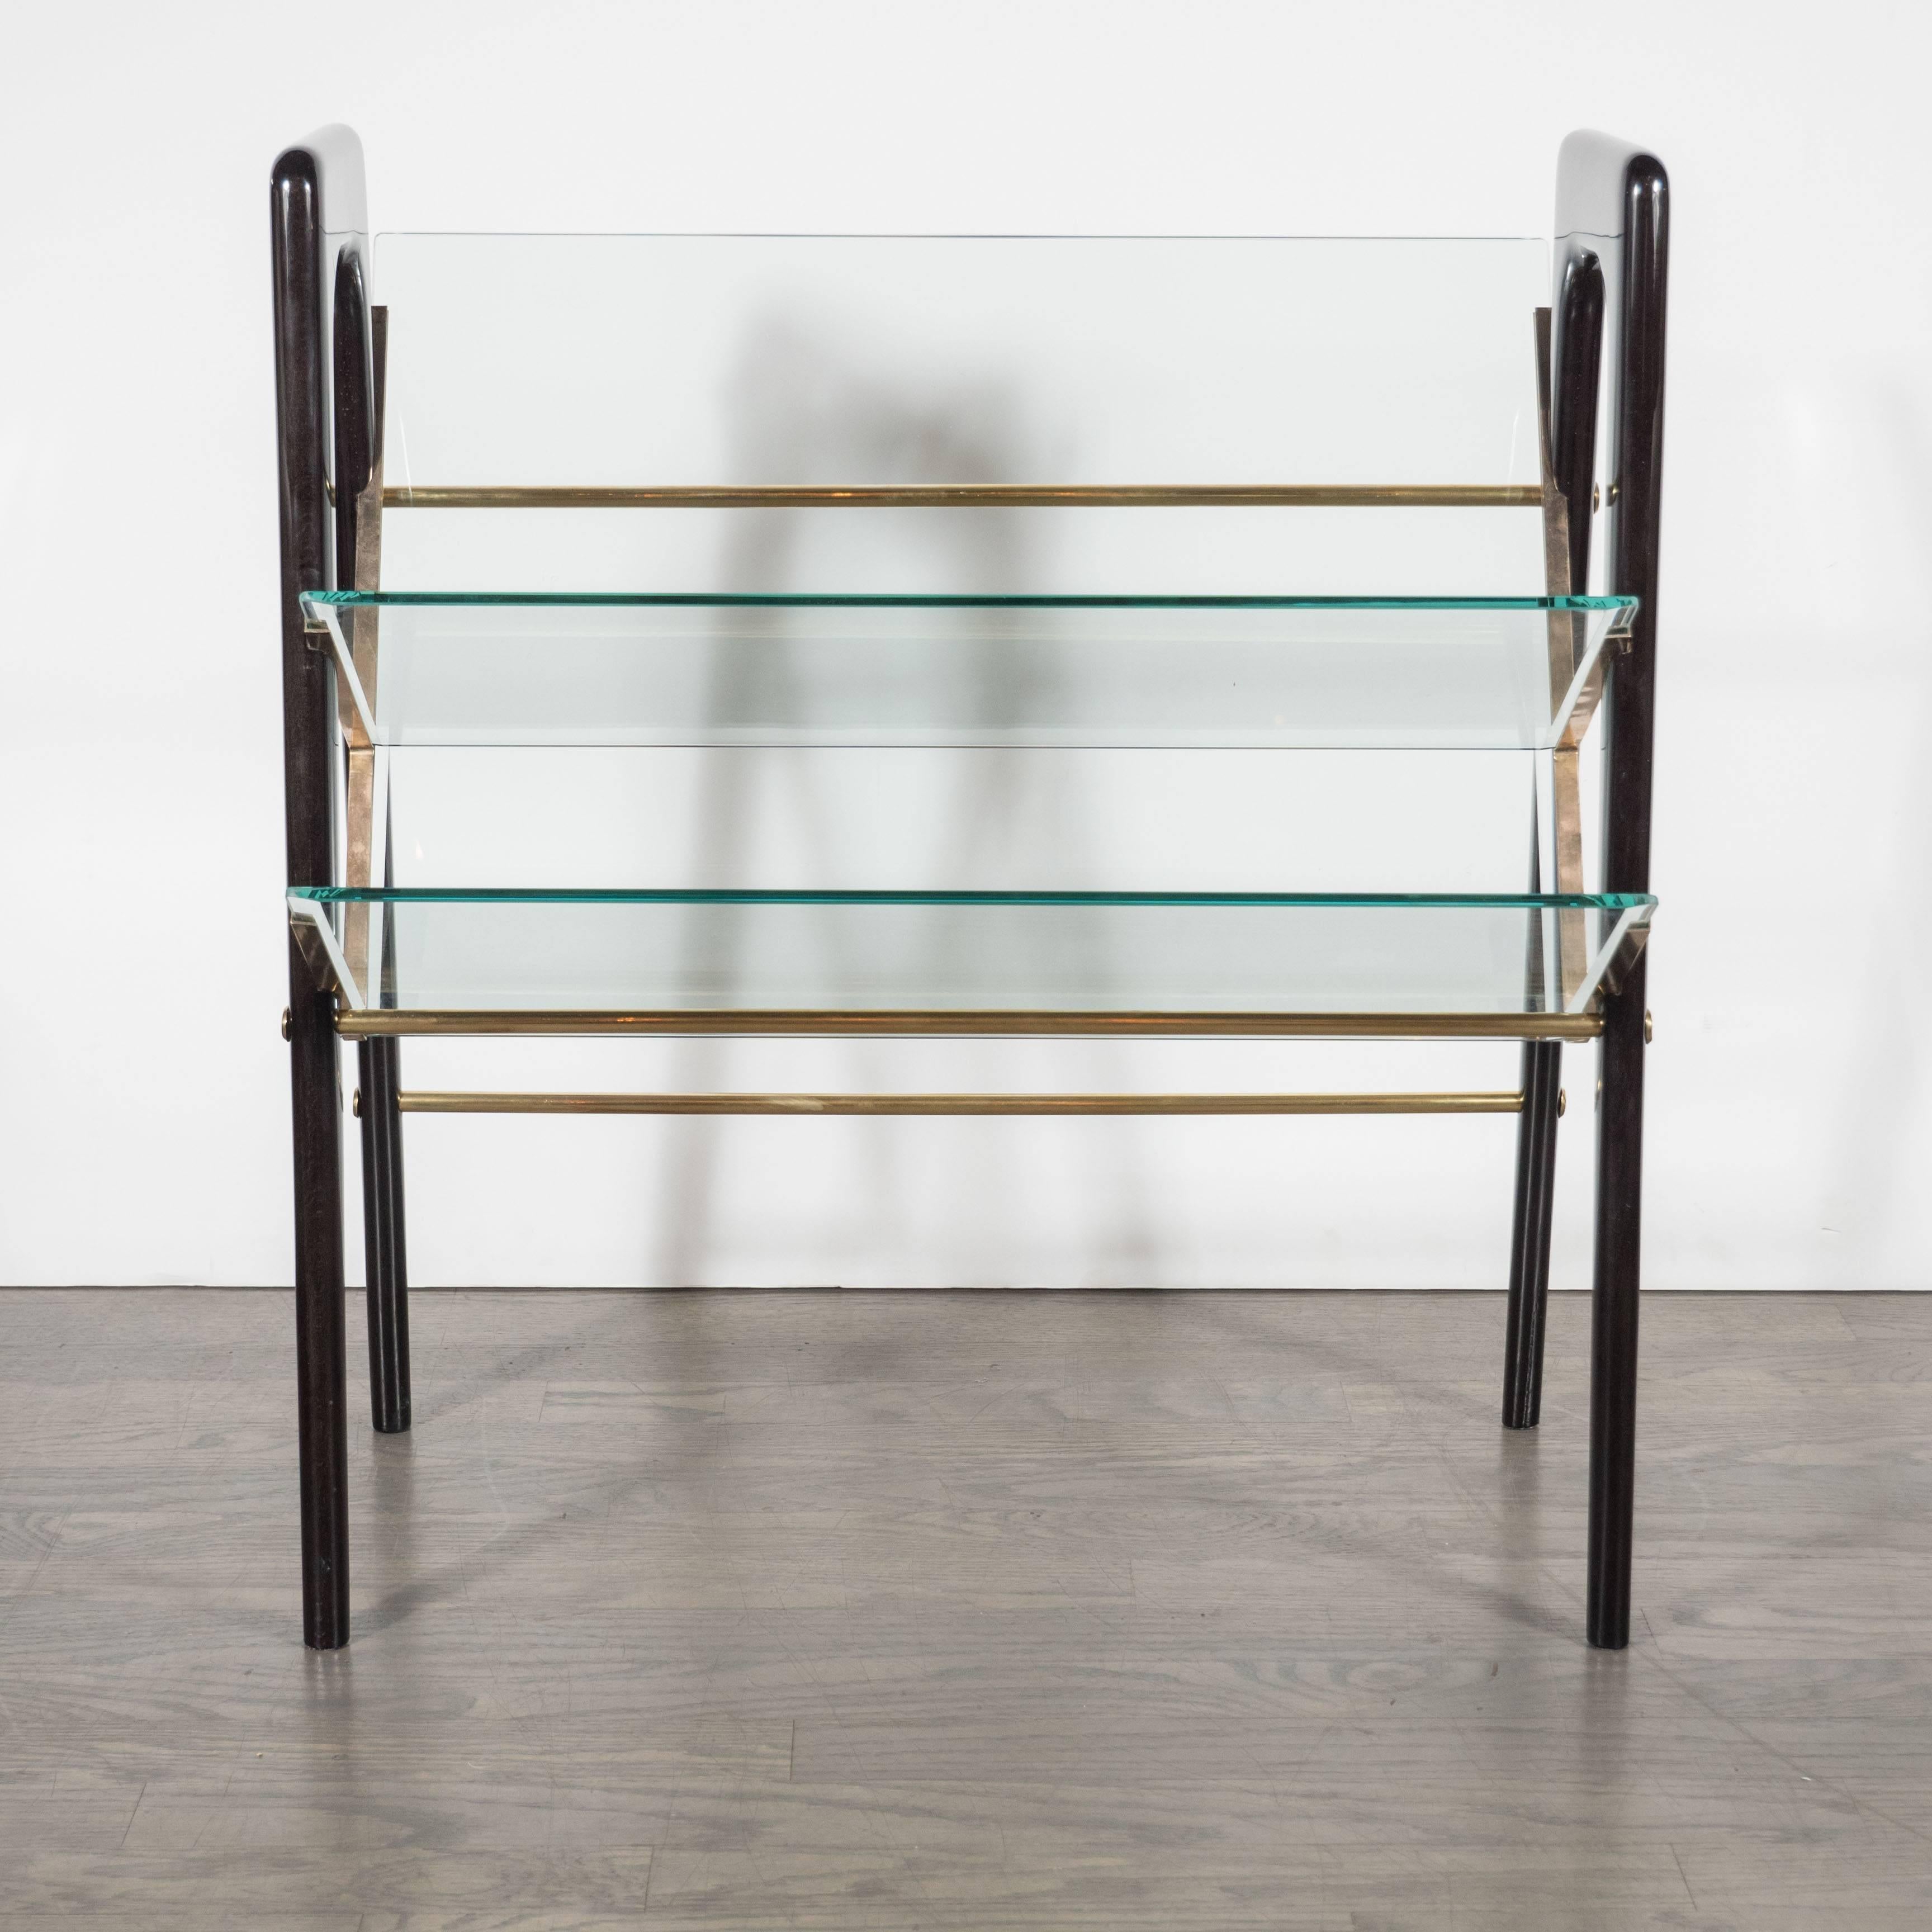 Italian Magazine Stand in Ebonized Walnut, Brass and Glass, in the Manner of Ico Parisi